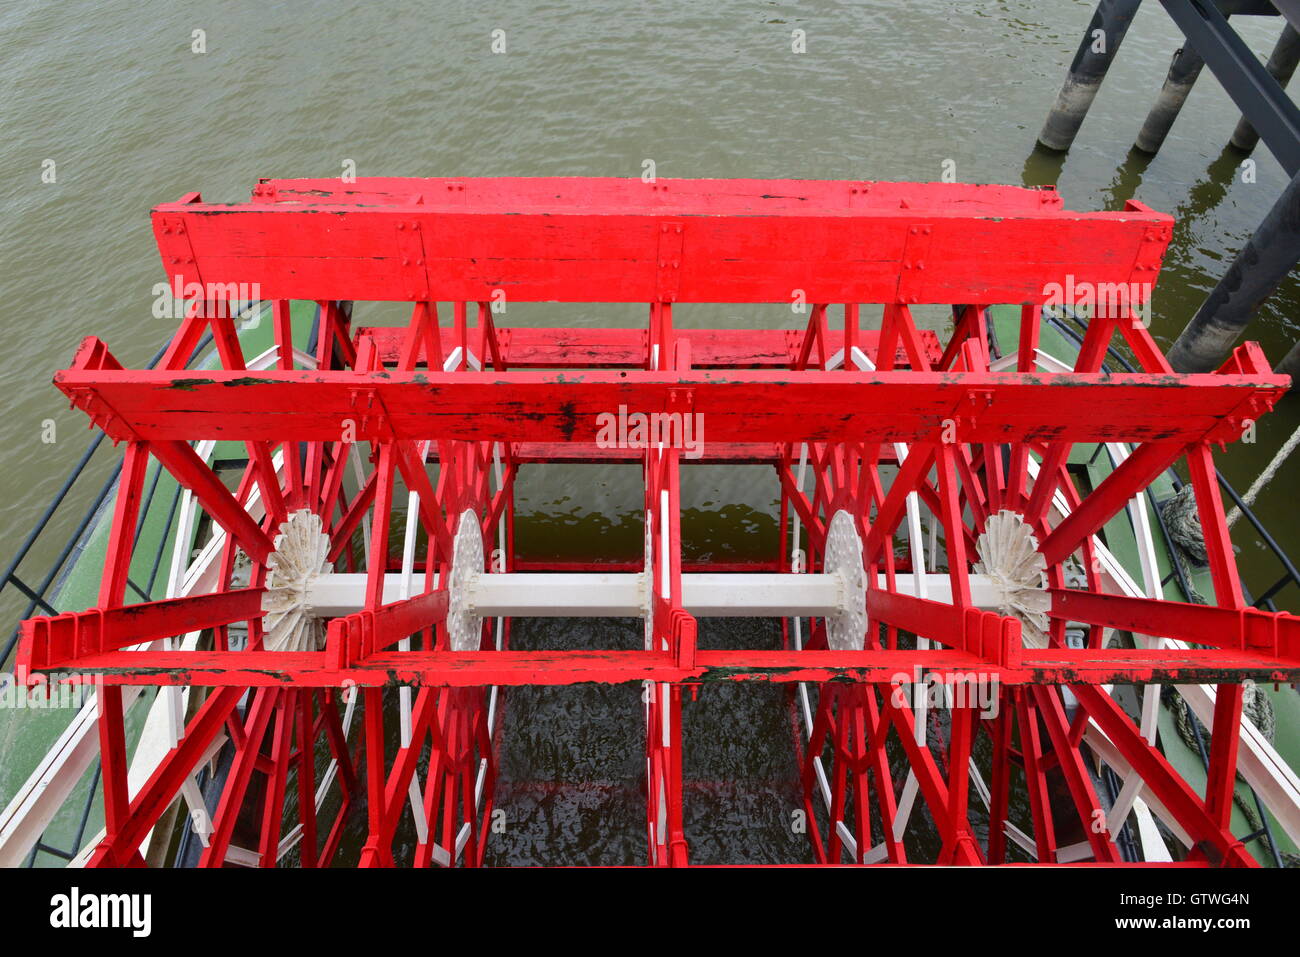 The paddles of a Paddle steamer on the Mississippi river. Stock Photo